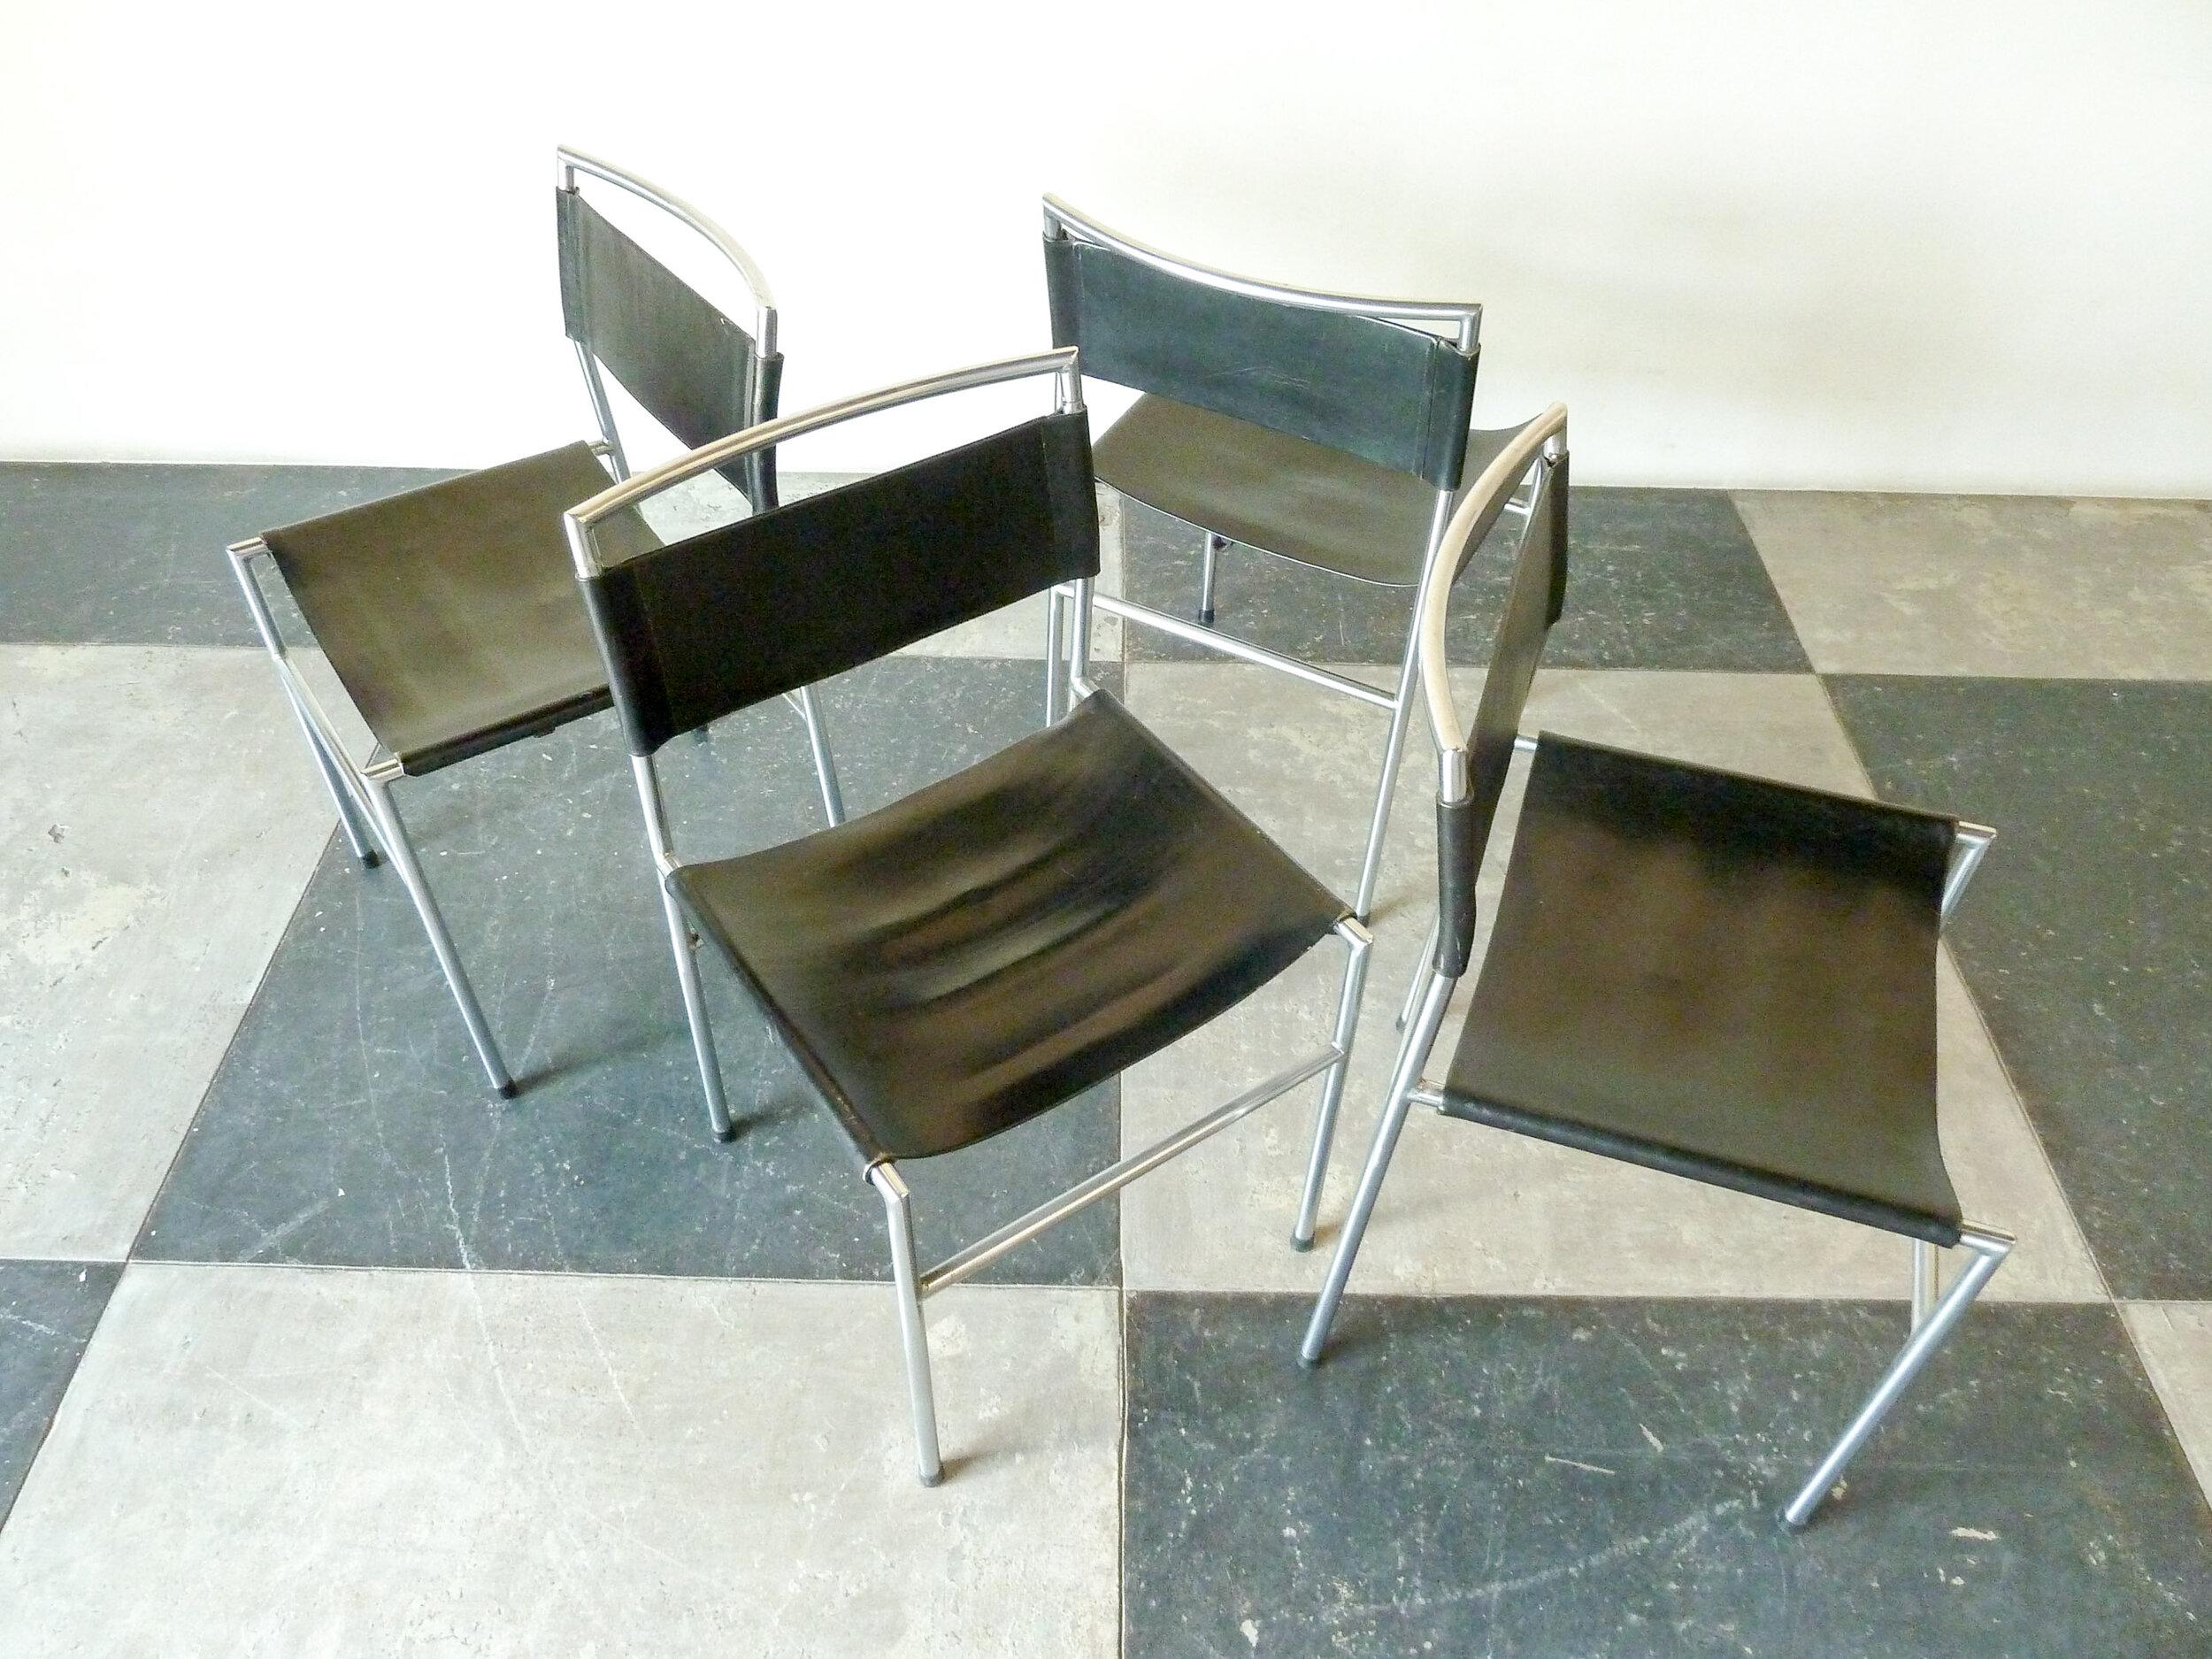 Set of Four Metaform dining chairs attributed to Arnold Merckx, 1943. The chairs are made of solid chrom metal frame with black saddle leather seat and back.

Approx dimensions: 31 1/2